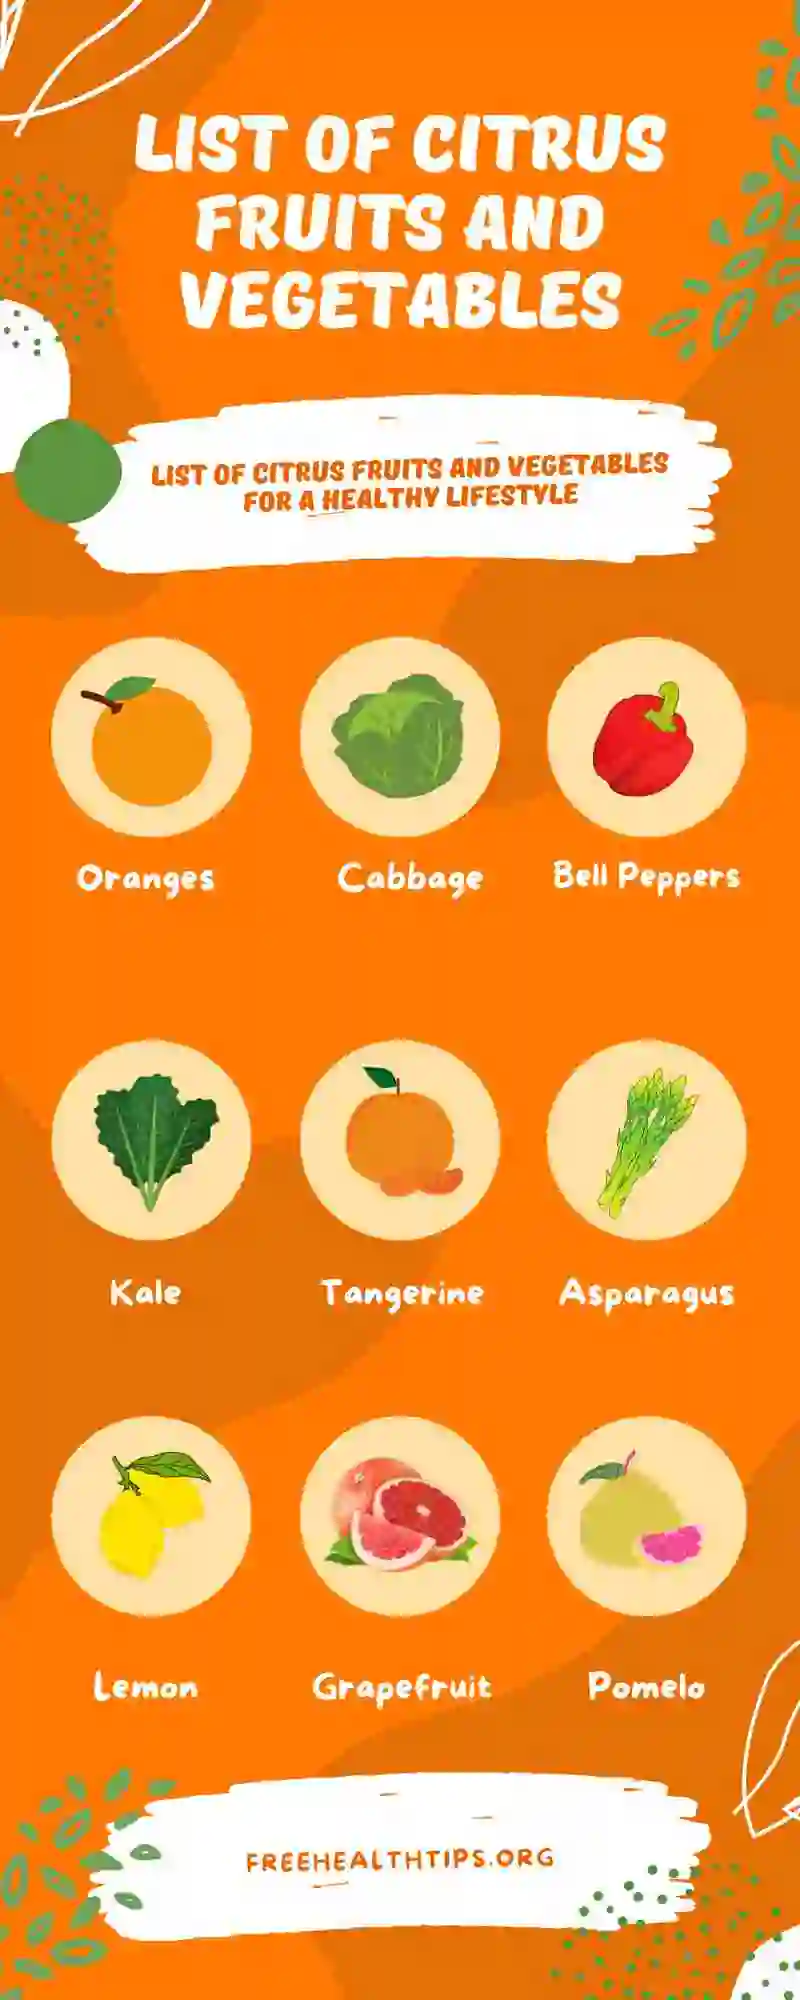 List of Citrus Fruits and Vegetables